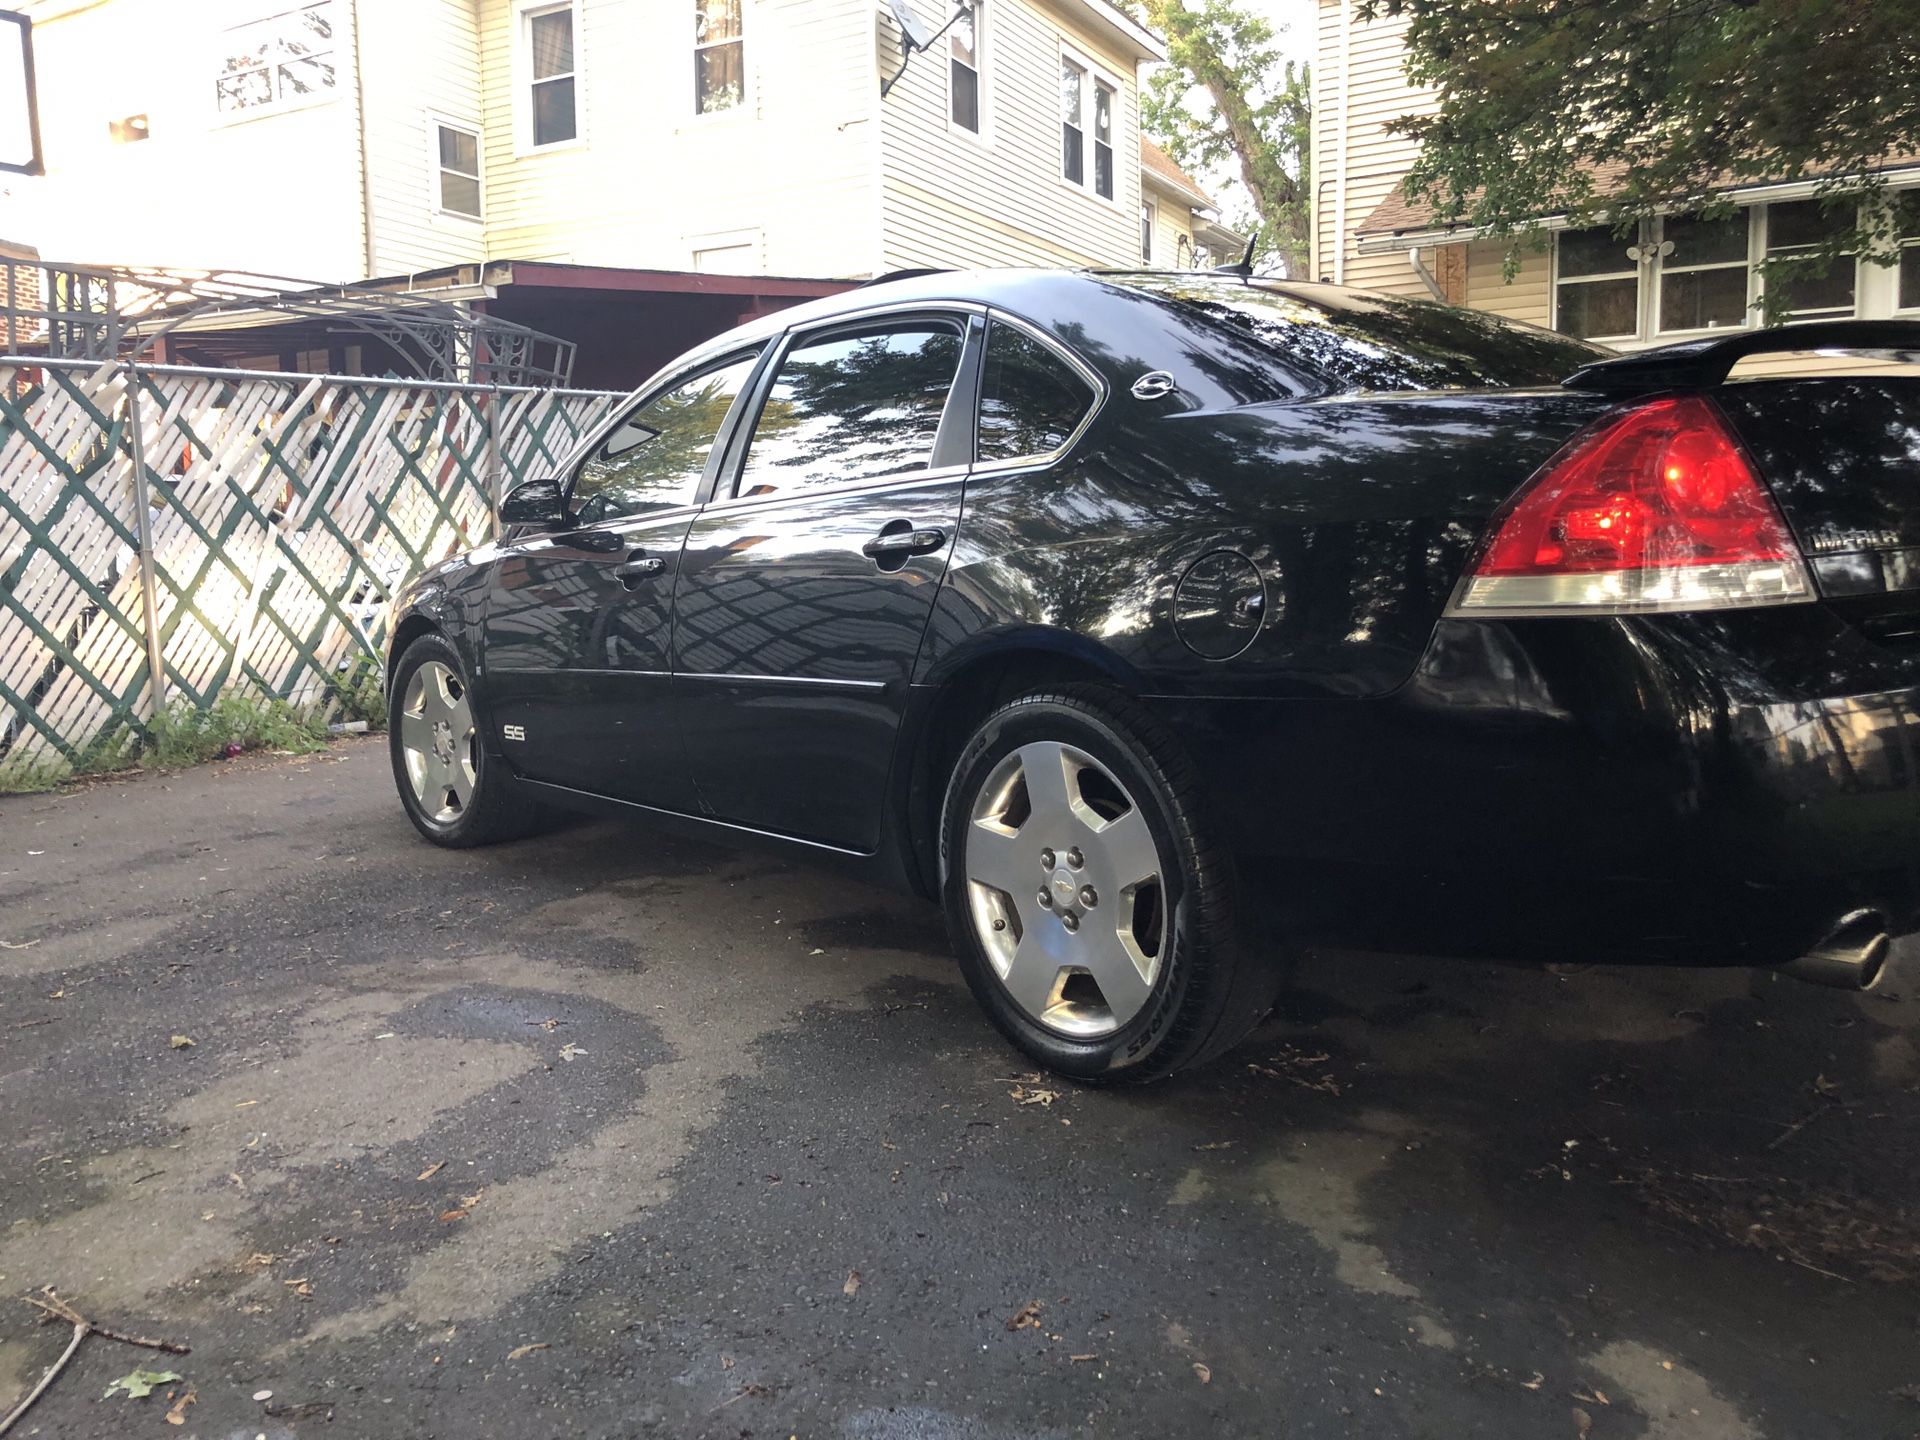 Chevy impala SS low miles 151,597 ...5.4L V8 need gone ASAP 4,200 Best Offer or Trade ... don’t be scare shoot me an offer